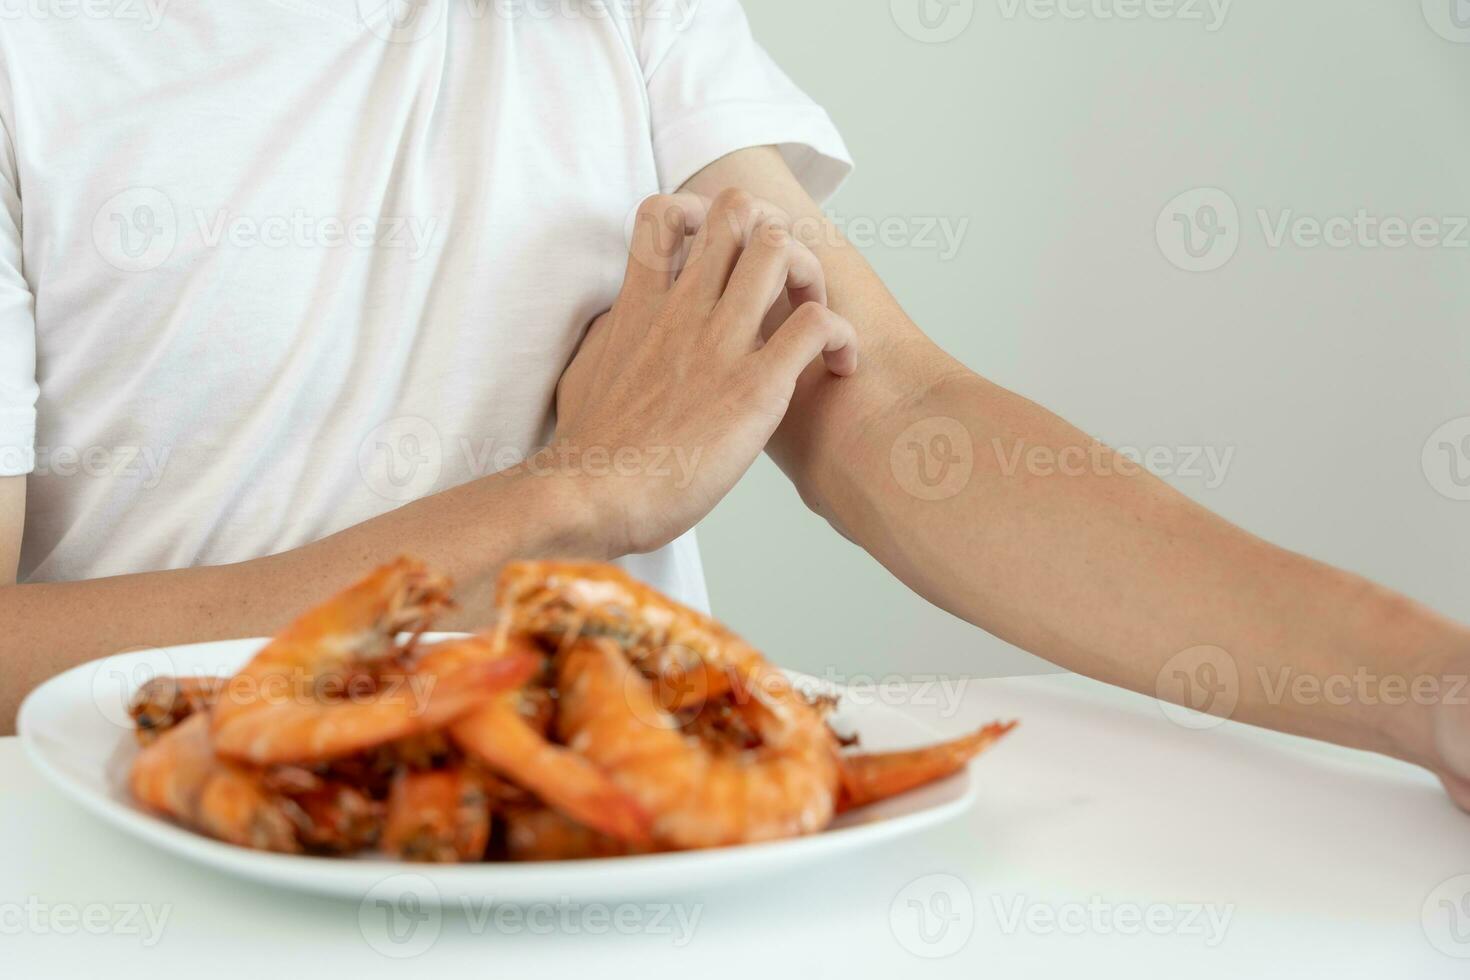 food allergies, men have reactions itching and redness after eating shrimp, seafood allergy, itching, rash, abdominal pain, diarrhea, chest tightness, unconsciousness, death, severe avoid allergies photo